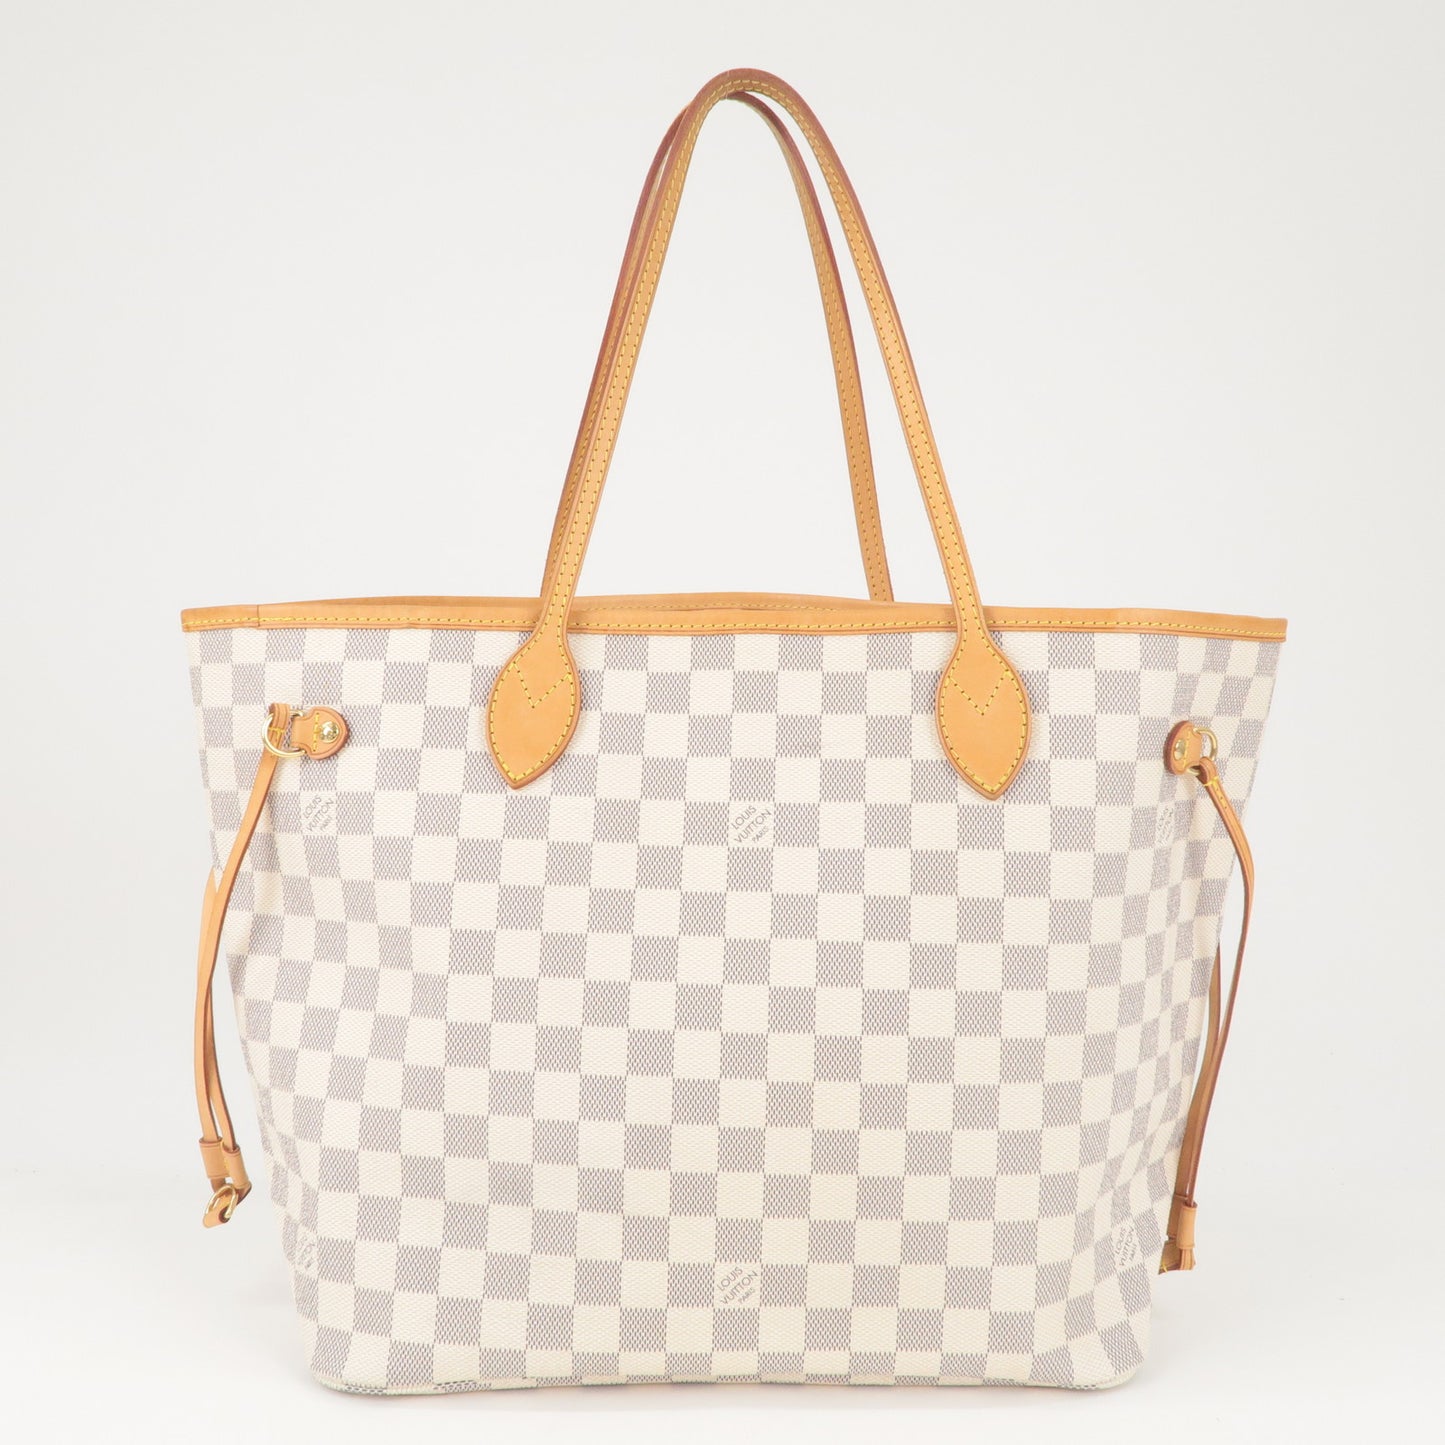 Authentic Louis Vuitton Damier Azur Neverfull MM Tote Bag N51107 Used F/S